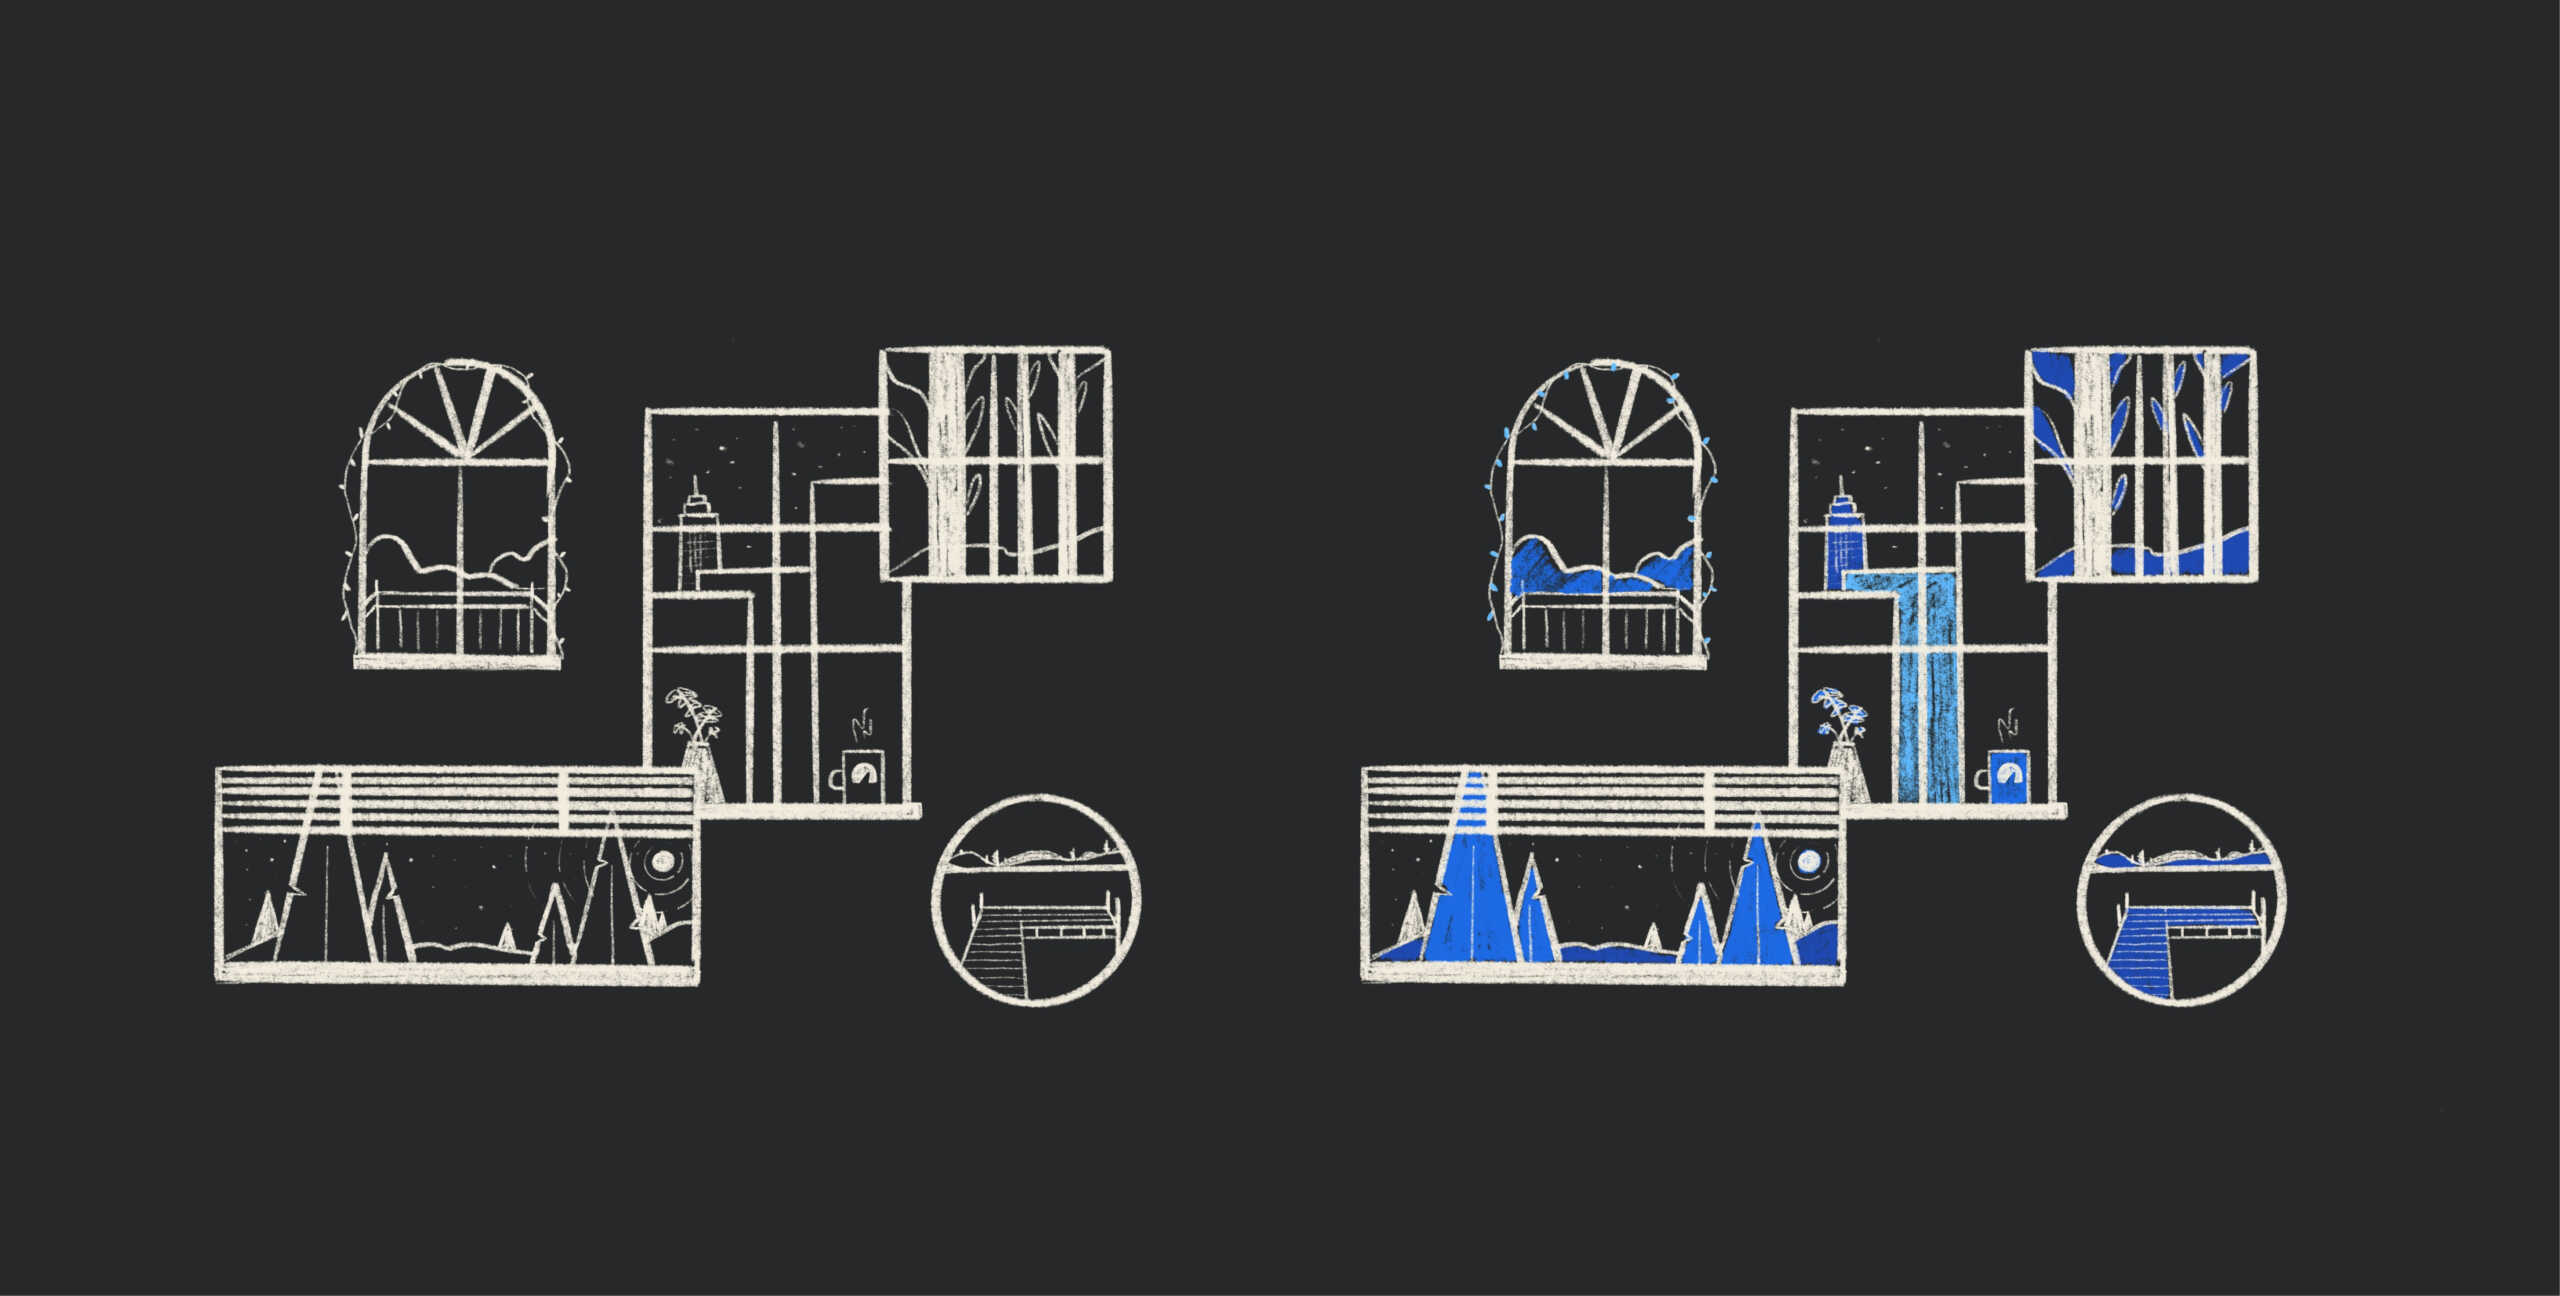 Sketch of various windows looking out into different scenery.